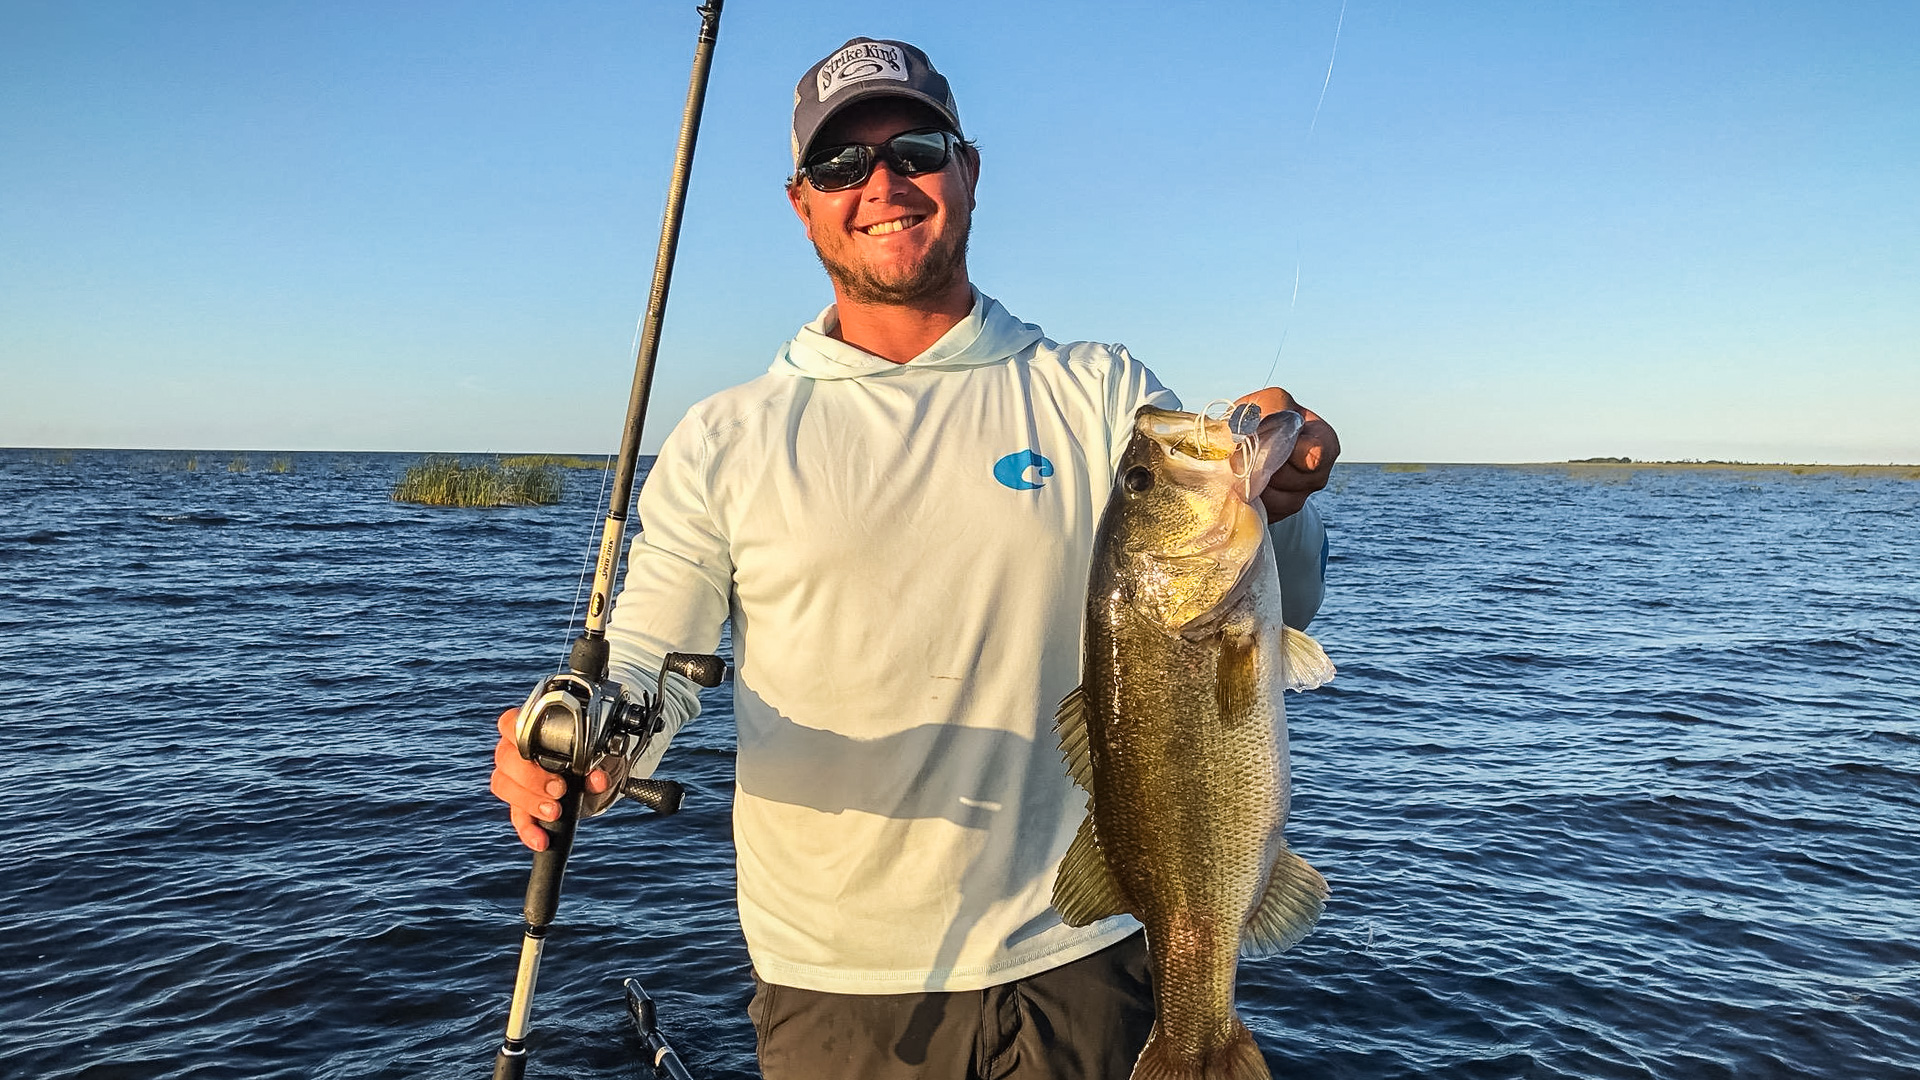 Cash in on the Florida Prespawn - Major League Fishing